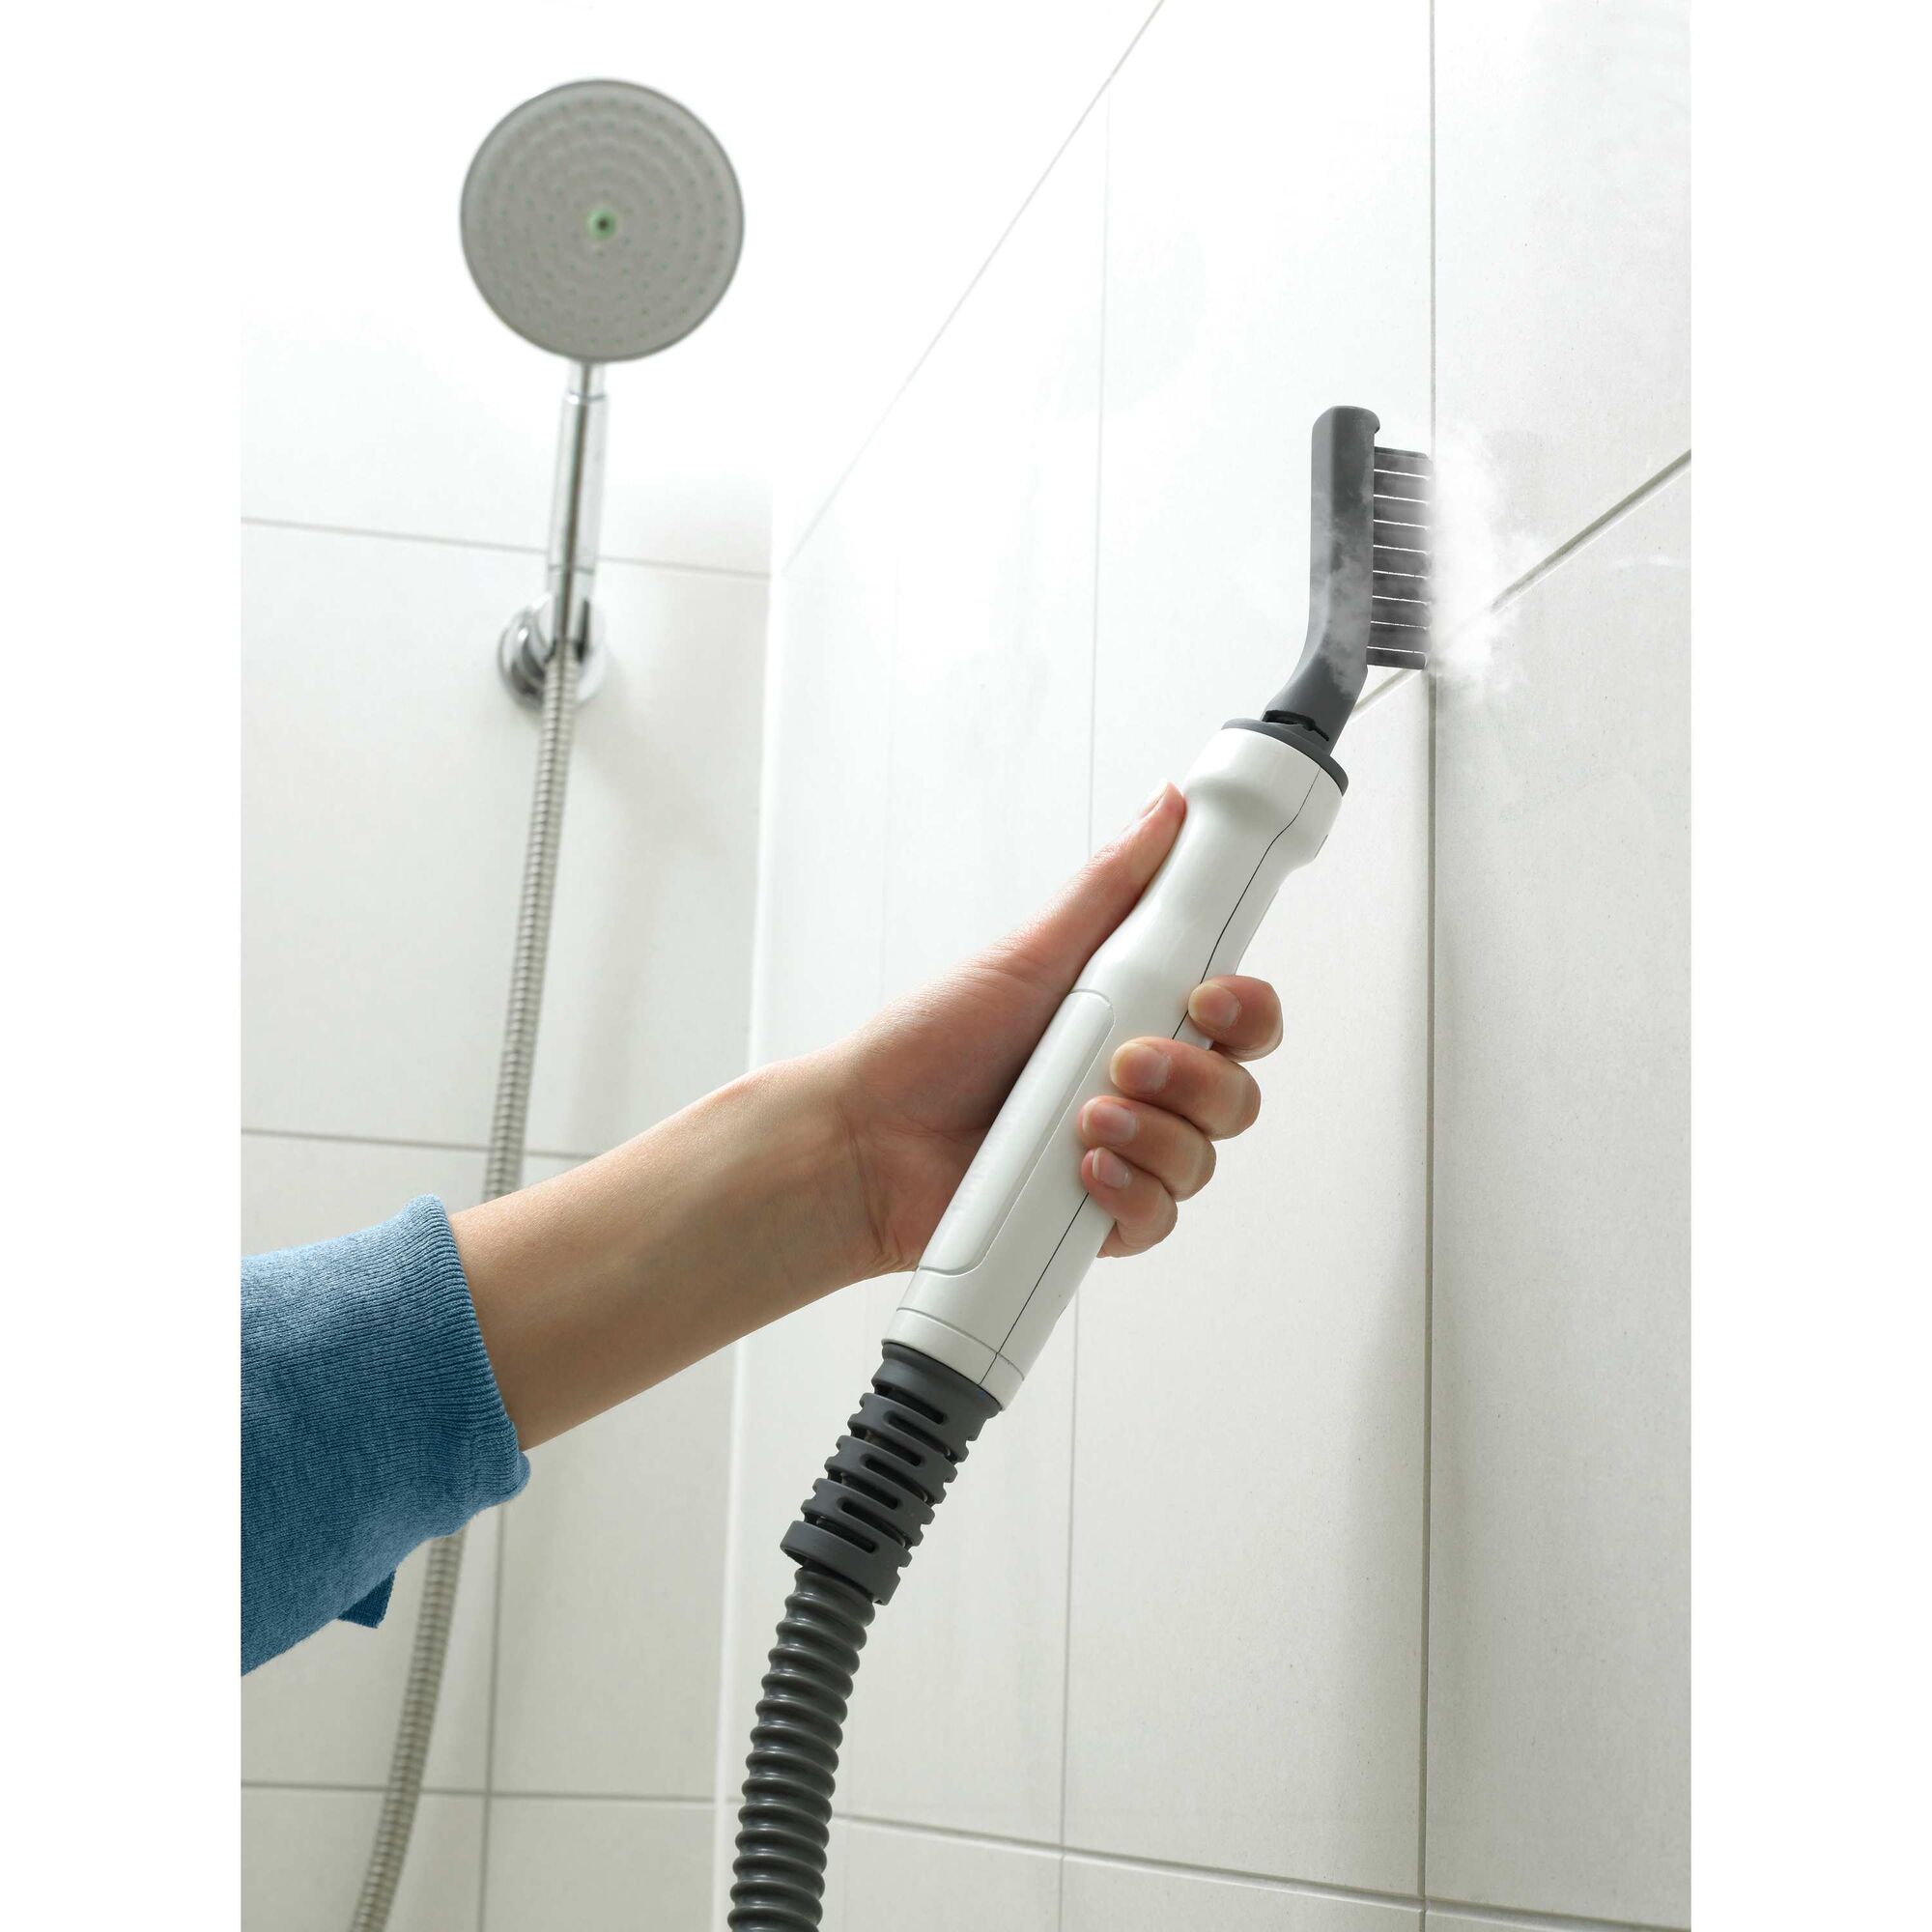 7 in 1 steam mop with steamglove handheld steamer be in g used to steam crevices between marble panels.